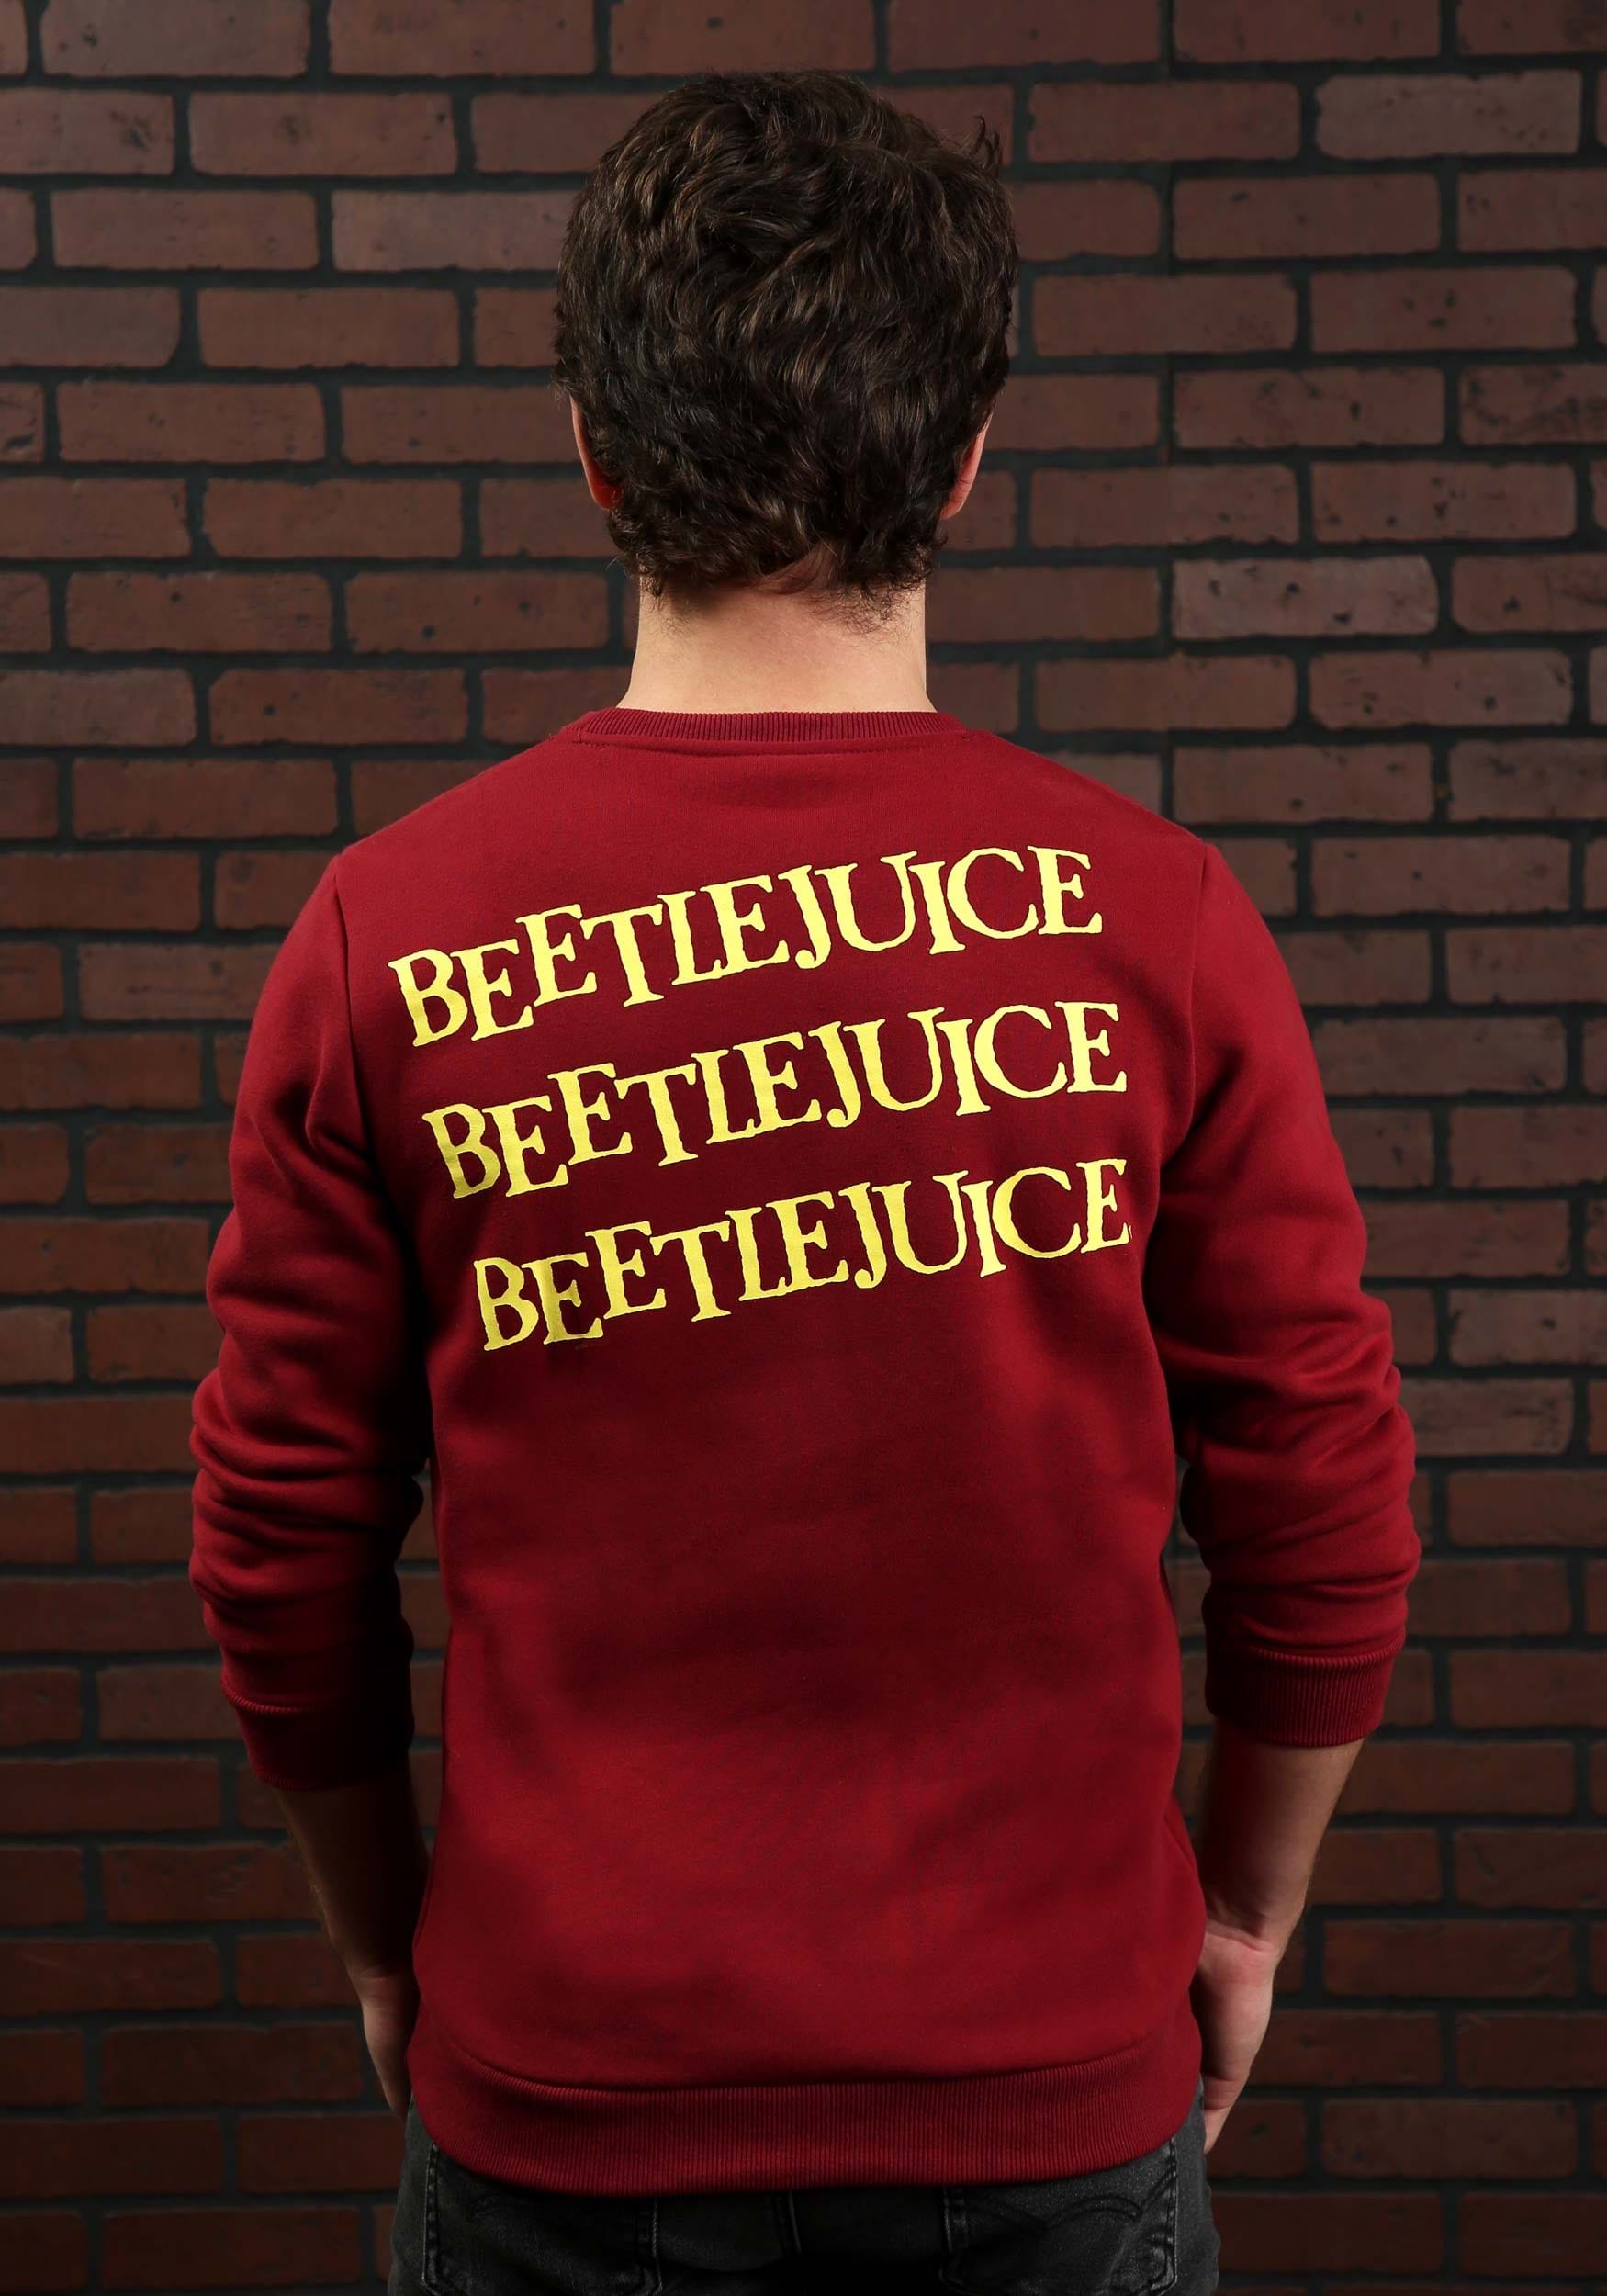 Cakeworthy Beetlejuice Tombstone Crew Neck Sweater For Adults